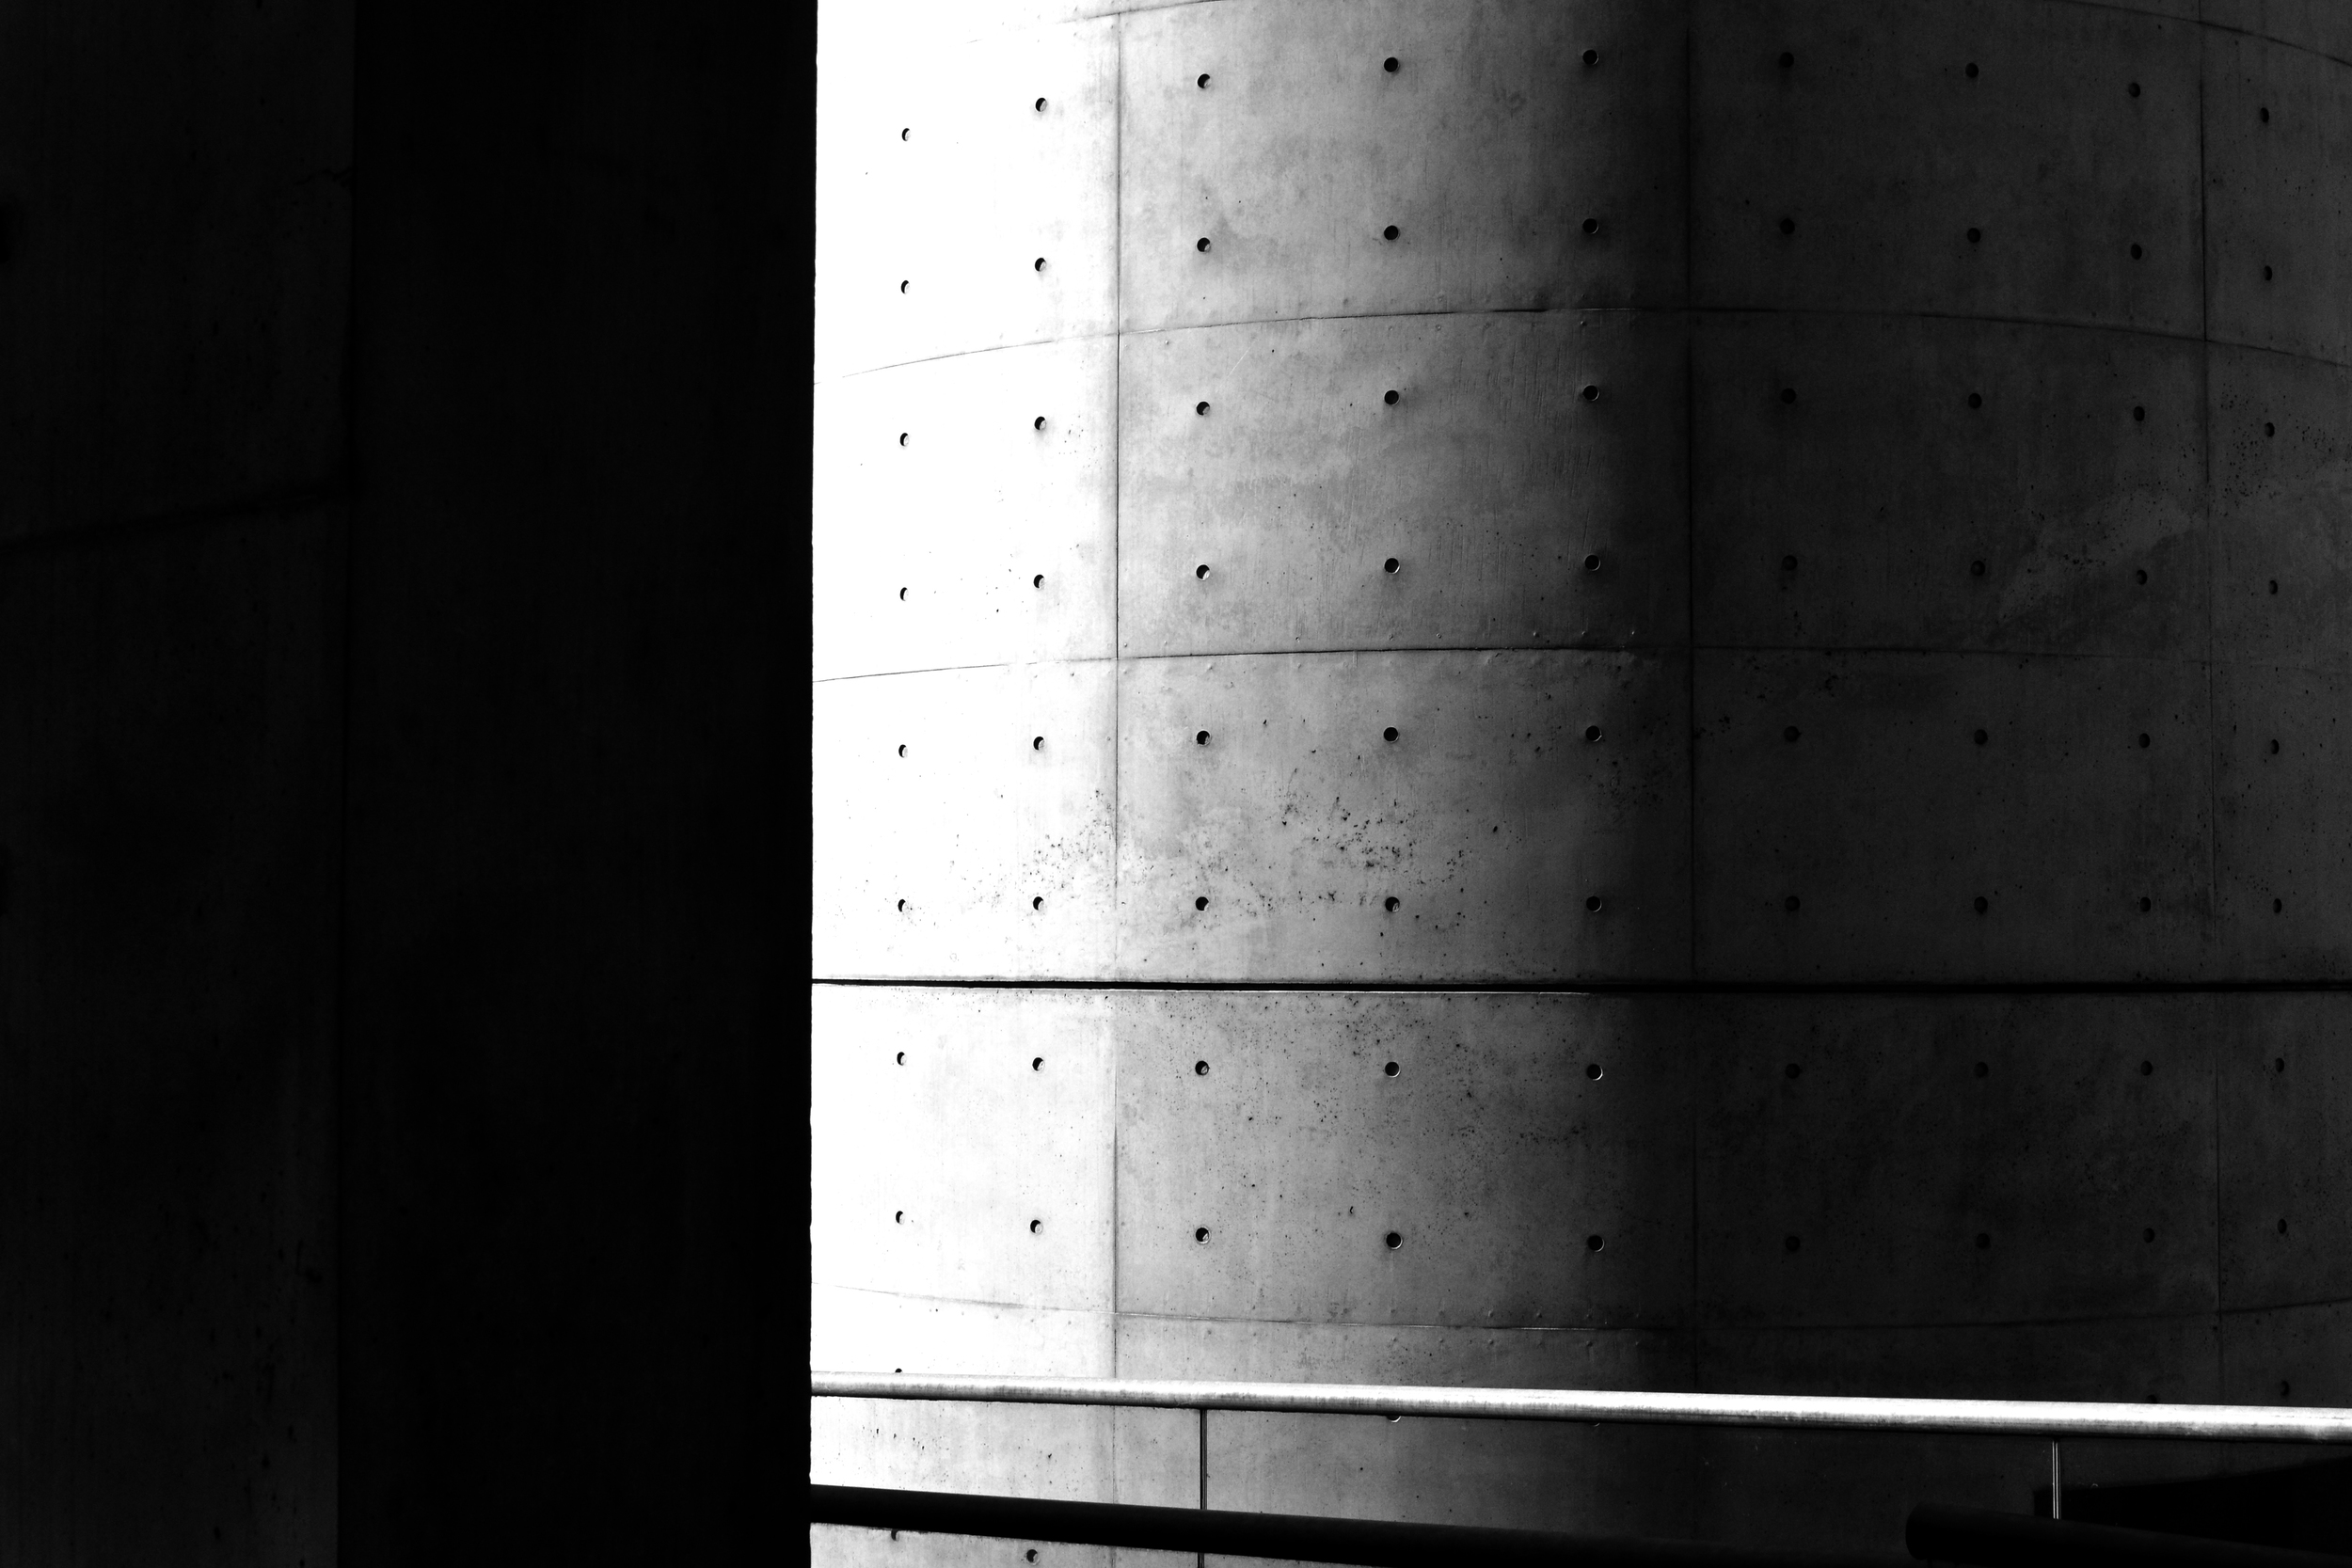 SOME/ARCHITECTURE : 'ABSENCE / PRESENCE' TADAO ANDO'S MEDITATION SPACE ...